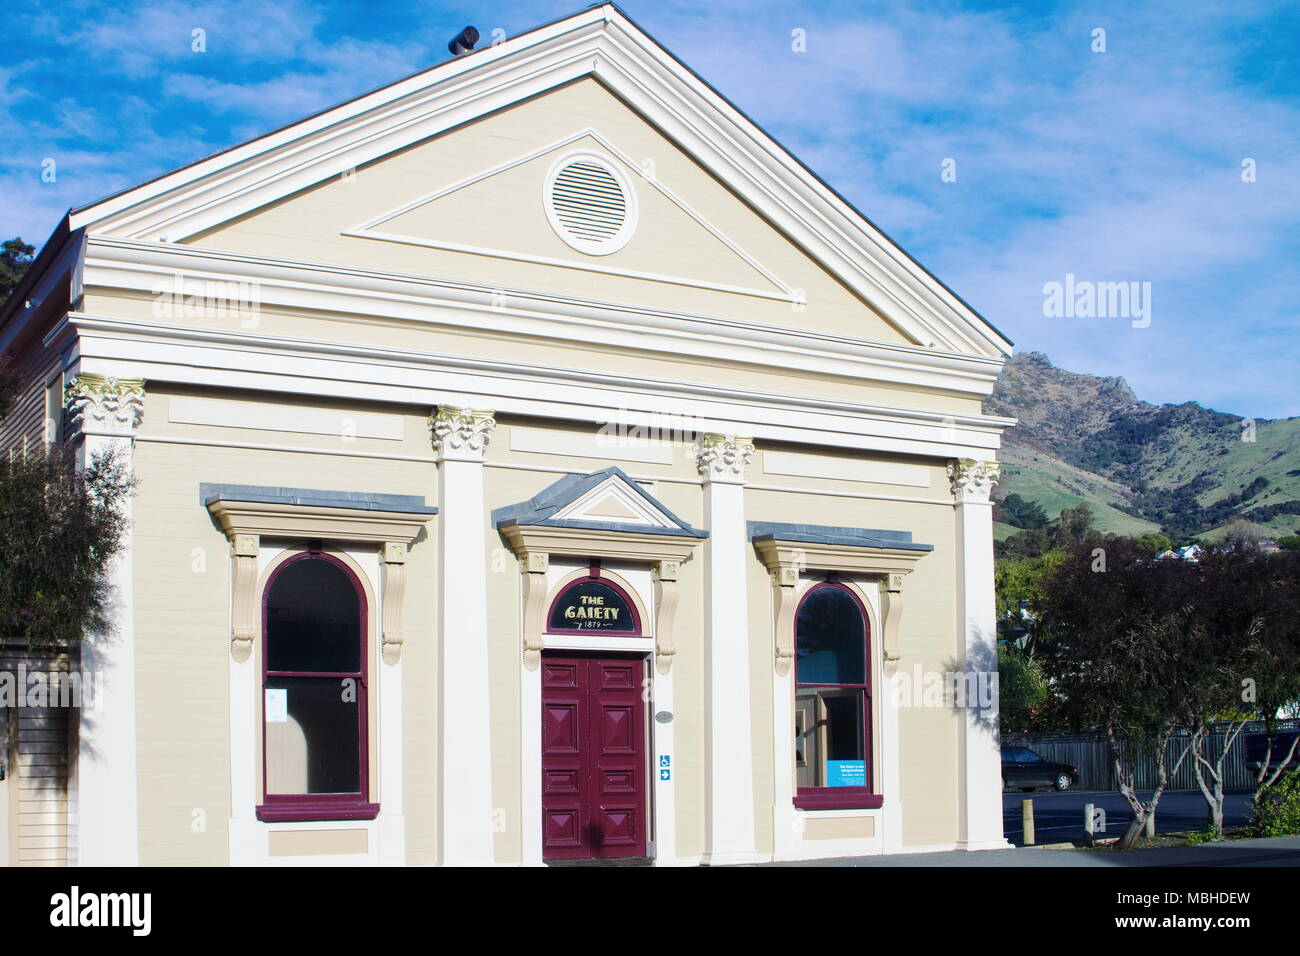 The Gaiety Theatre , Akaroa, New Zealand is the town’s main theatre and gathering place Stock Photo